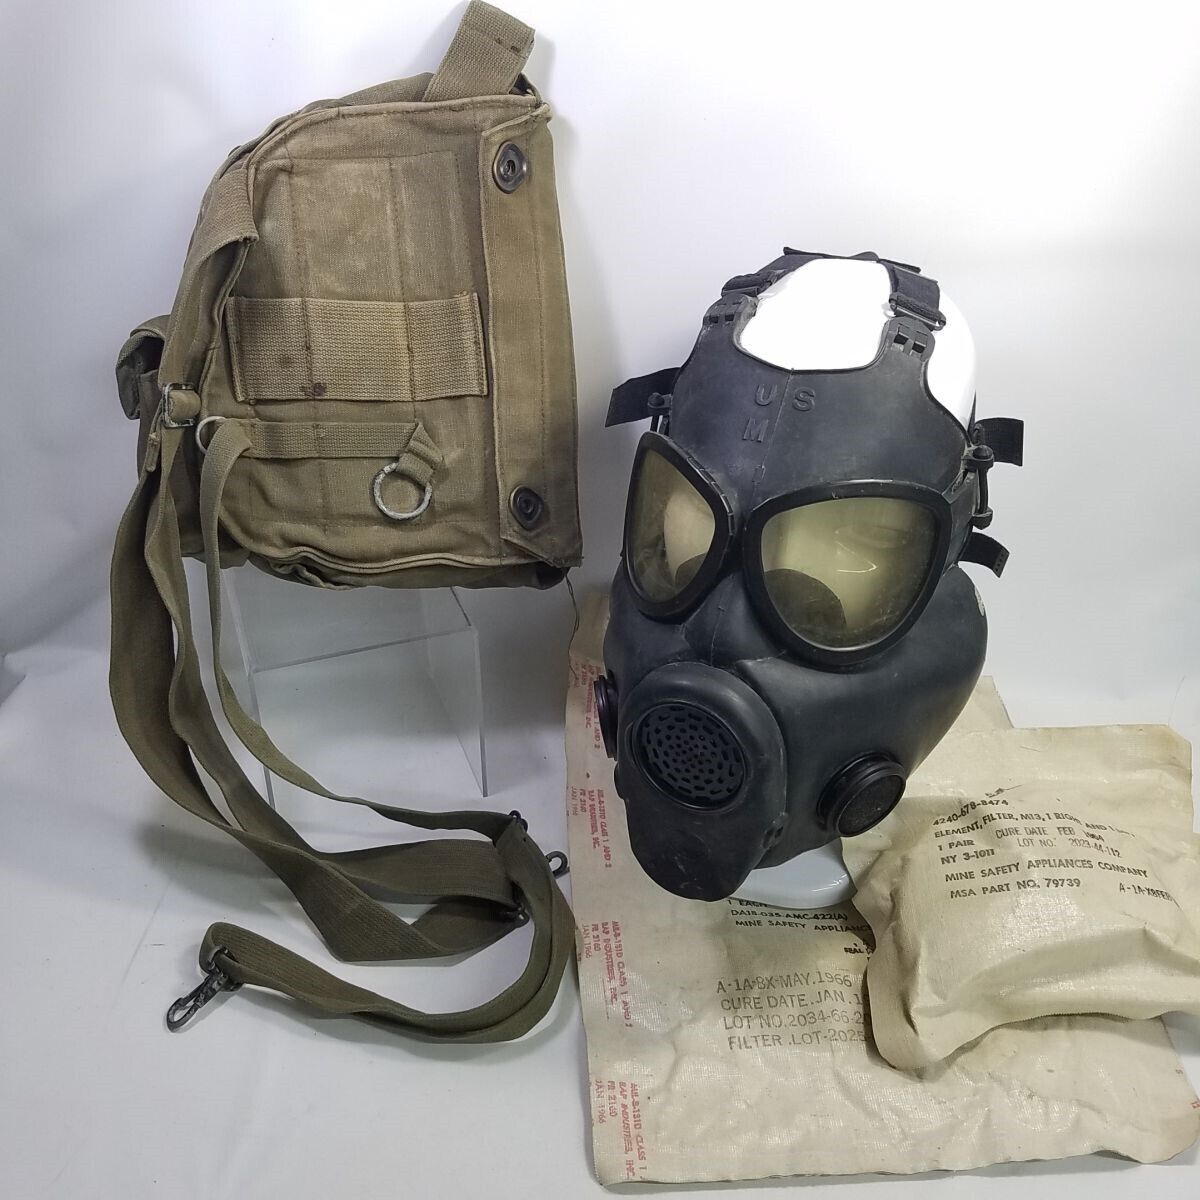 Vtg US Army Gas Mask ABC-M17 Canvas Bag Filters Issue Bags 1964 1966 Vietnam Era